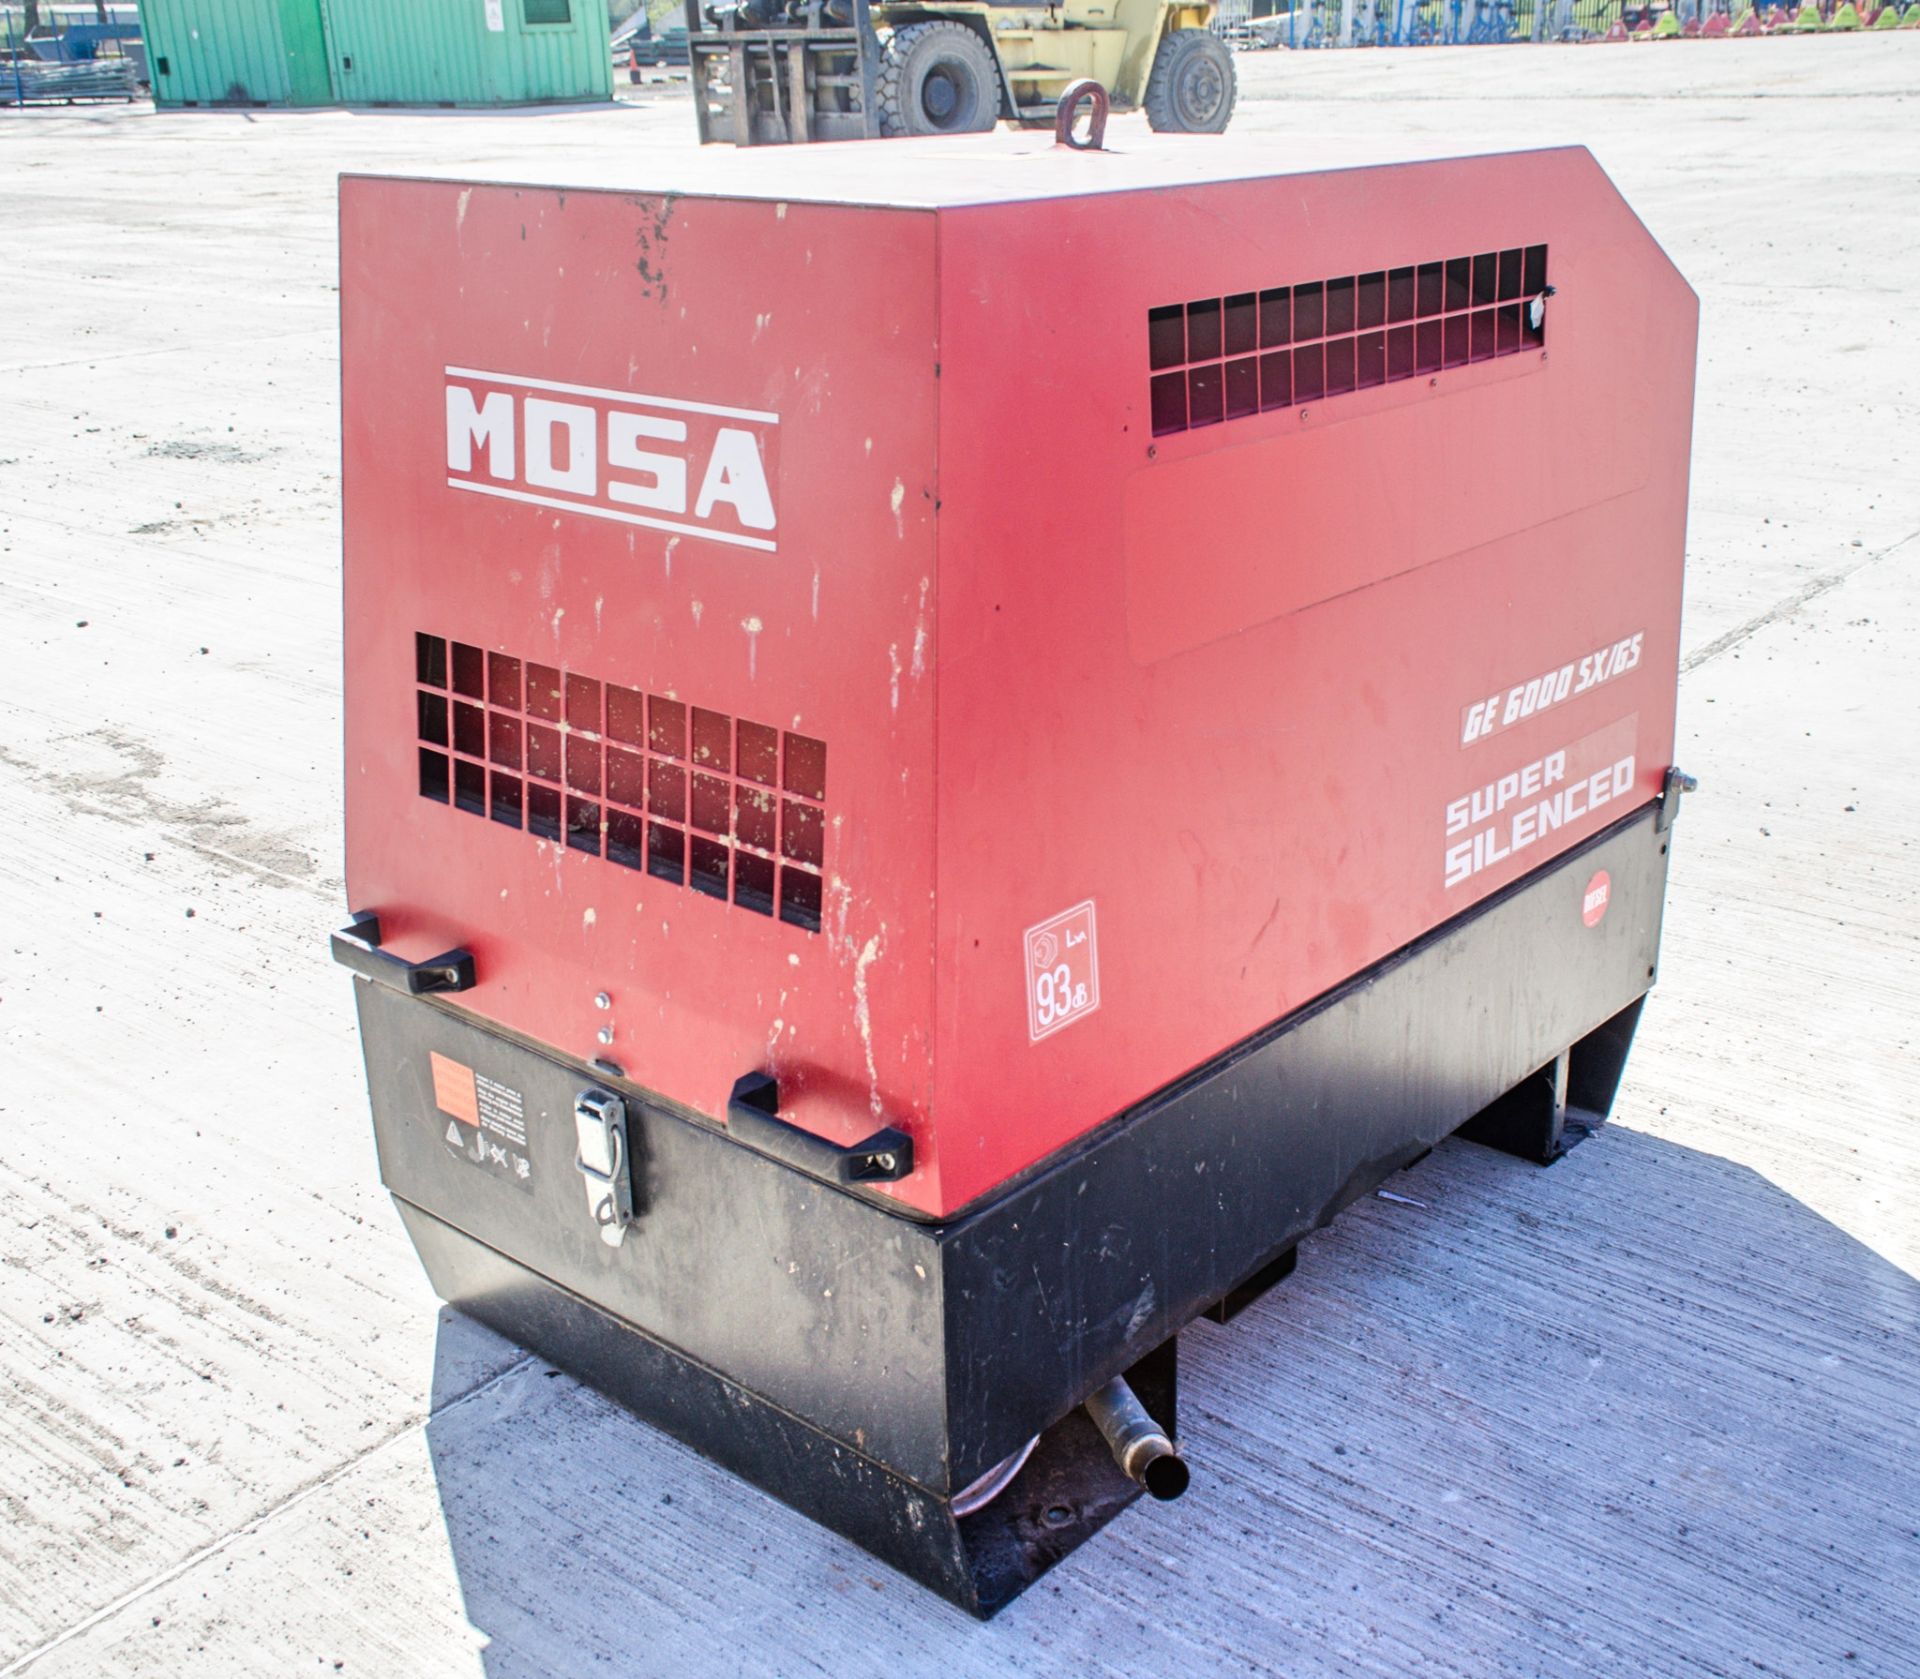 Mosa GE6000 SX/GS diesel driven generator Year: 2013 S/N: 044587 Recorded Hours: 485 - Image 2 of 4